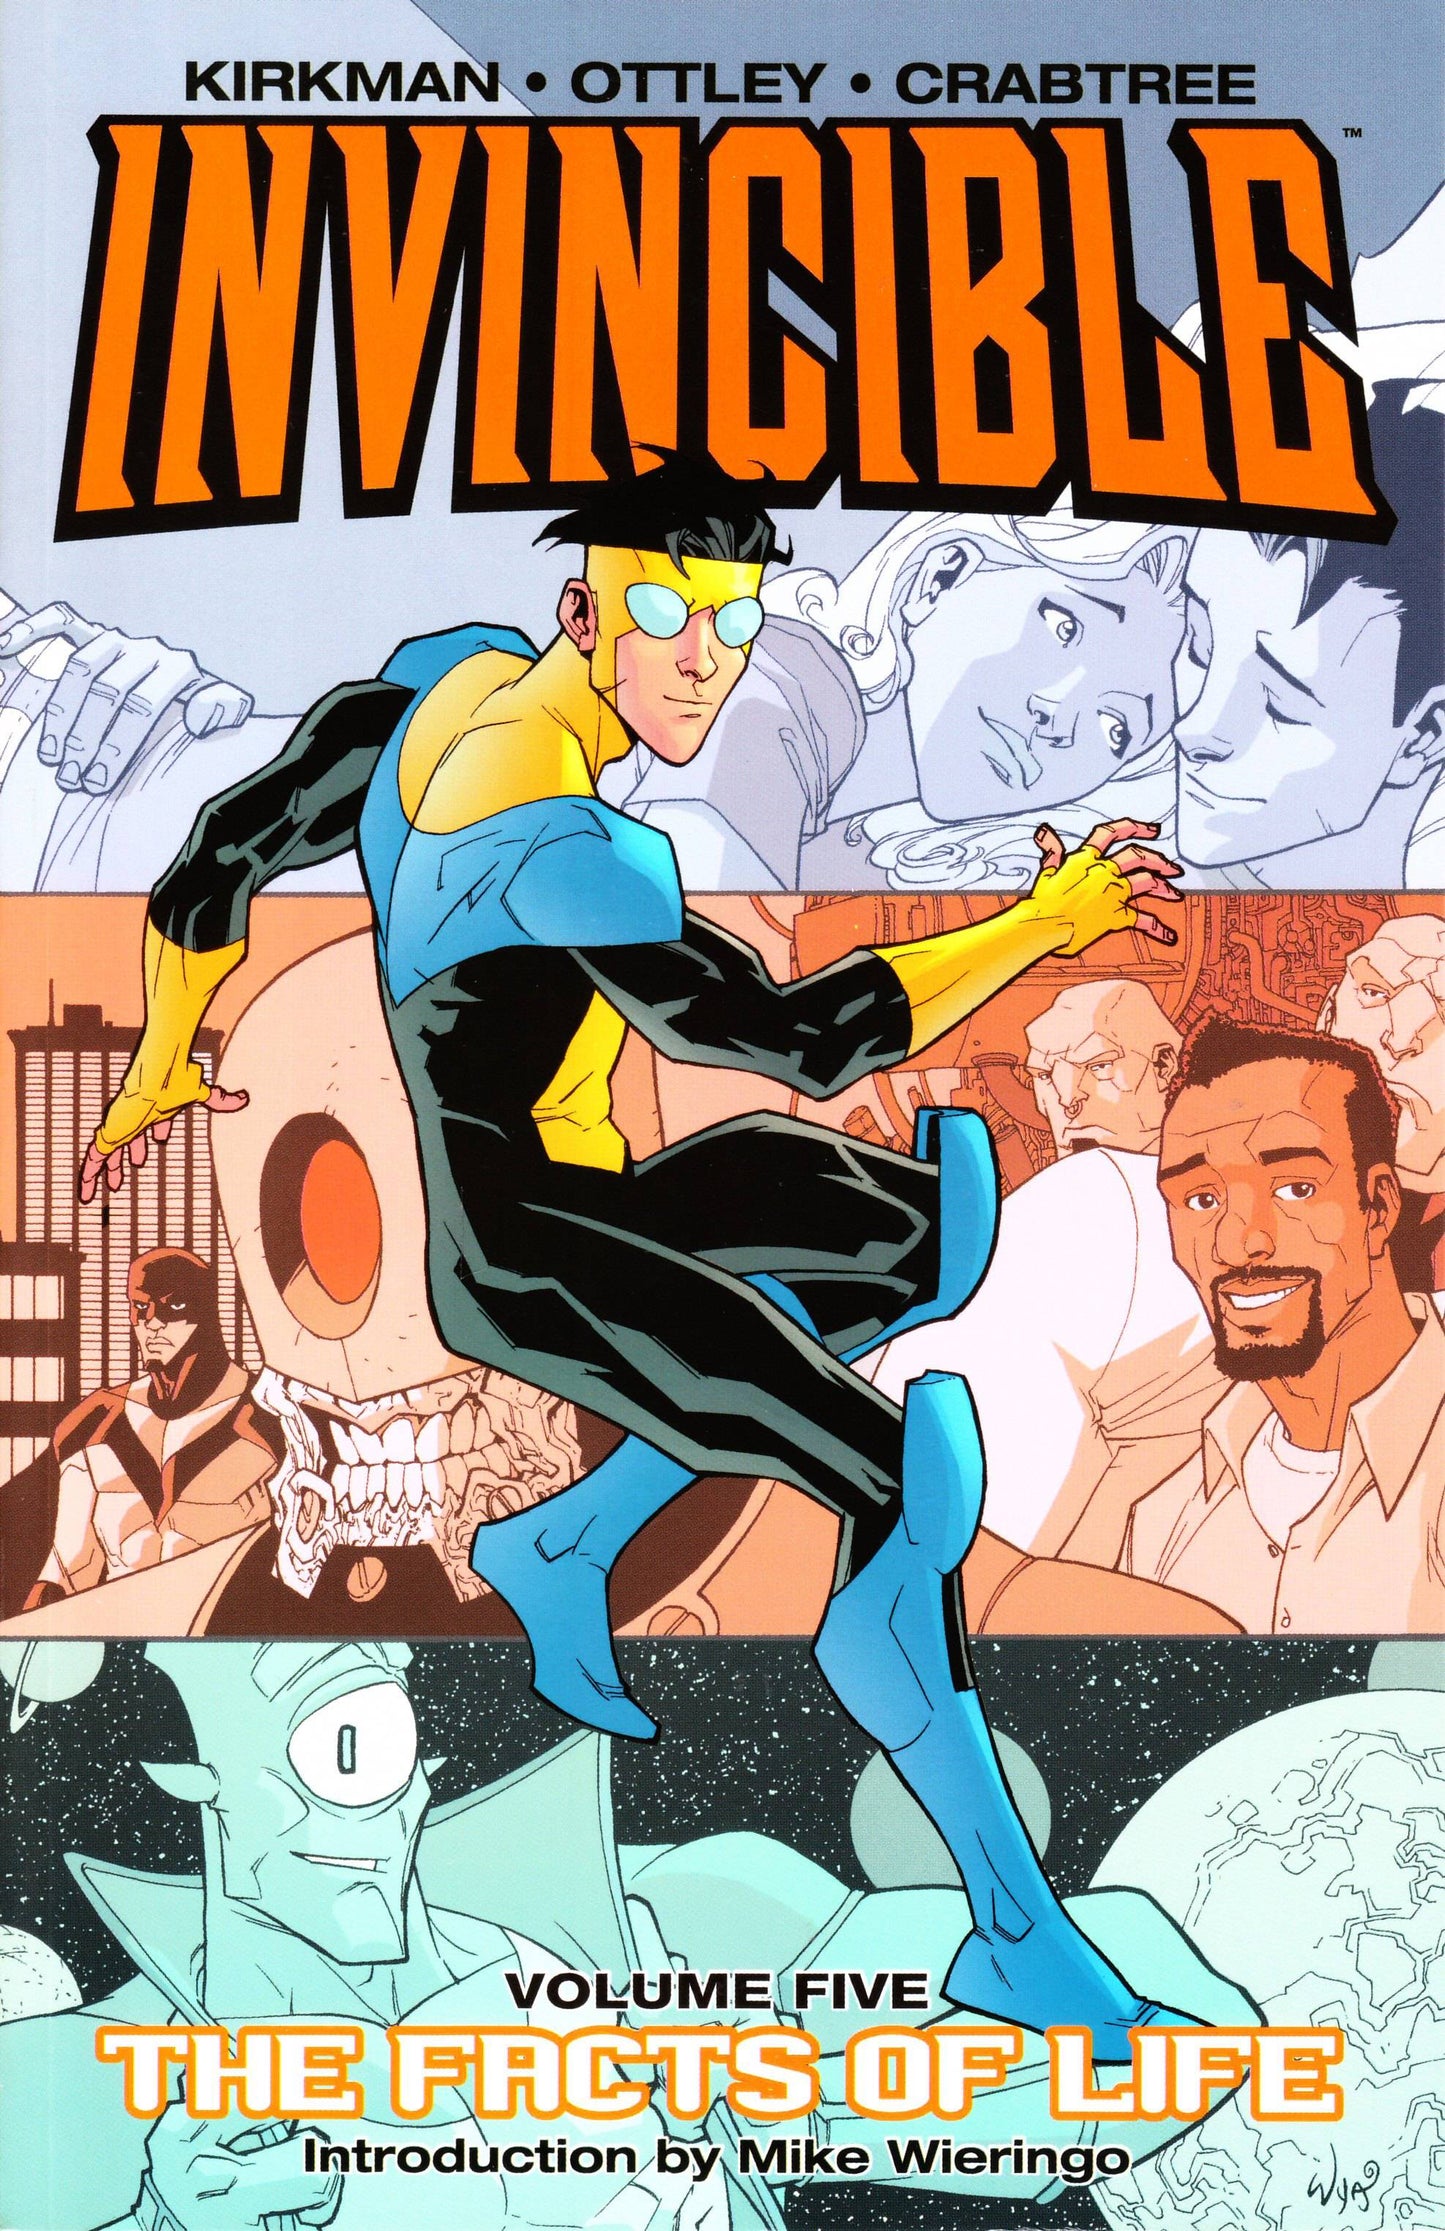 INVINCIBLE VOL 05 THE FACTS OF LIFE